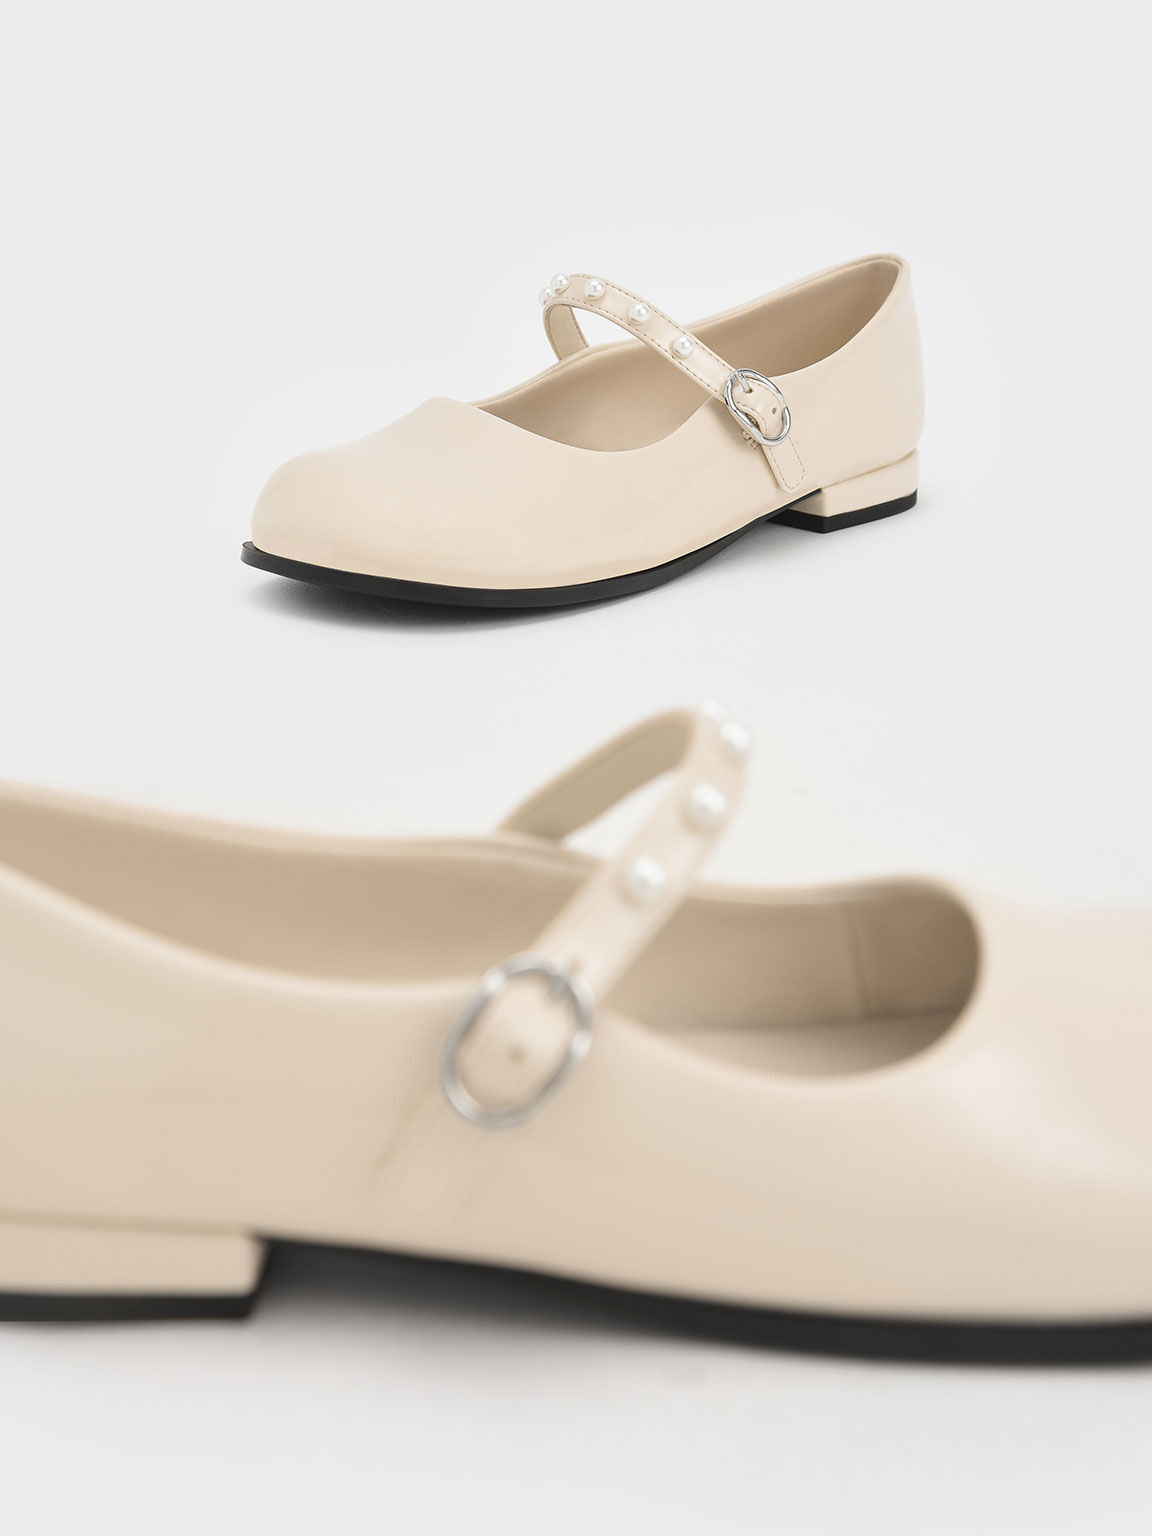 Girls' Patent Pearl-Embellished Mary Janes, Cream, hi-res